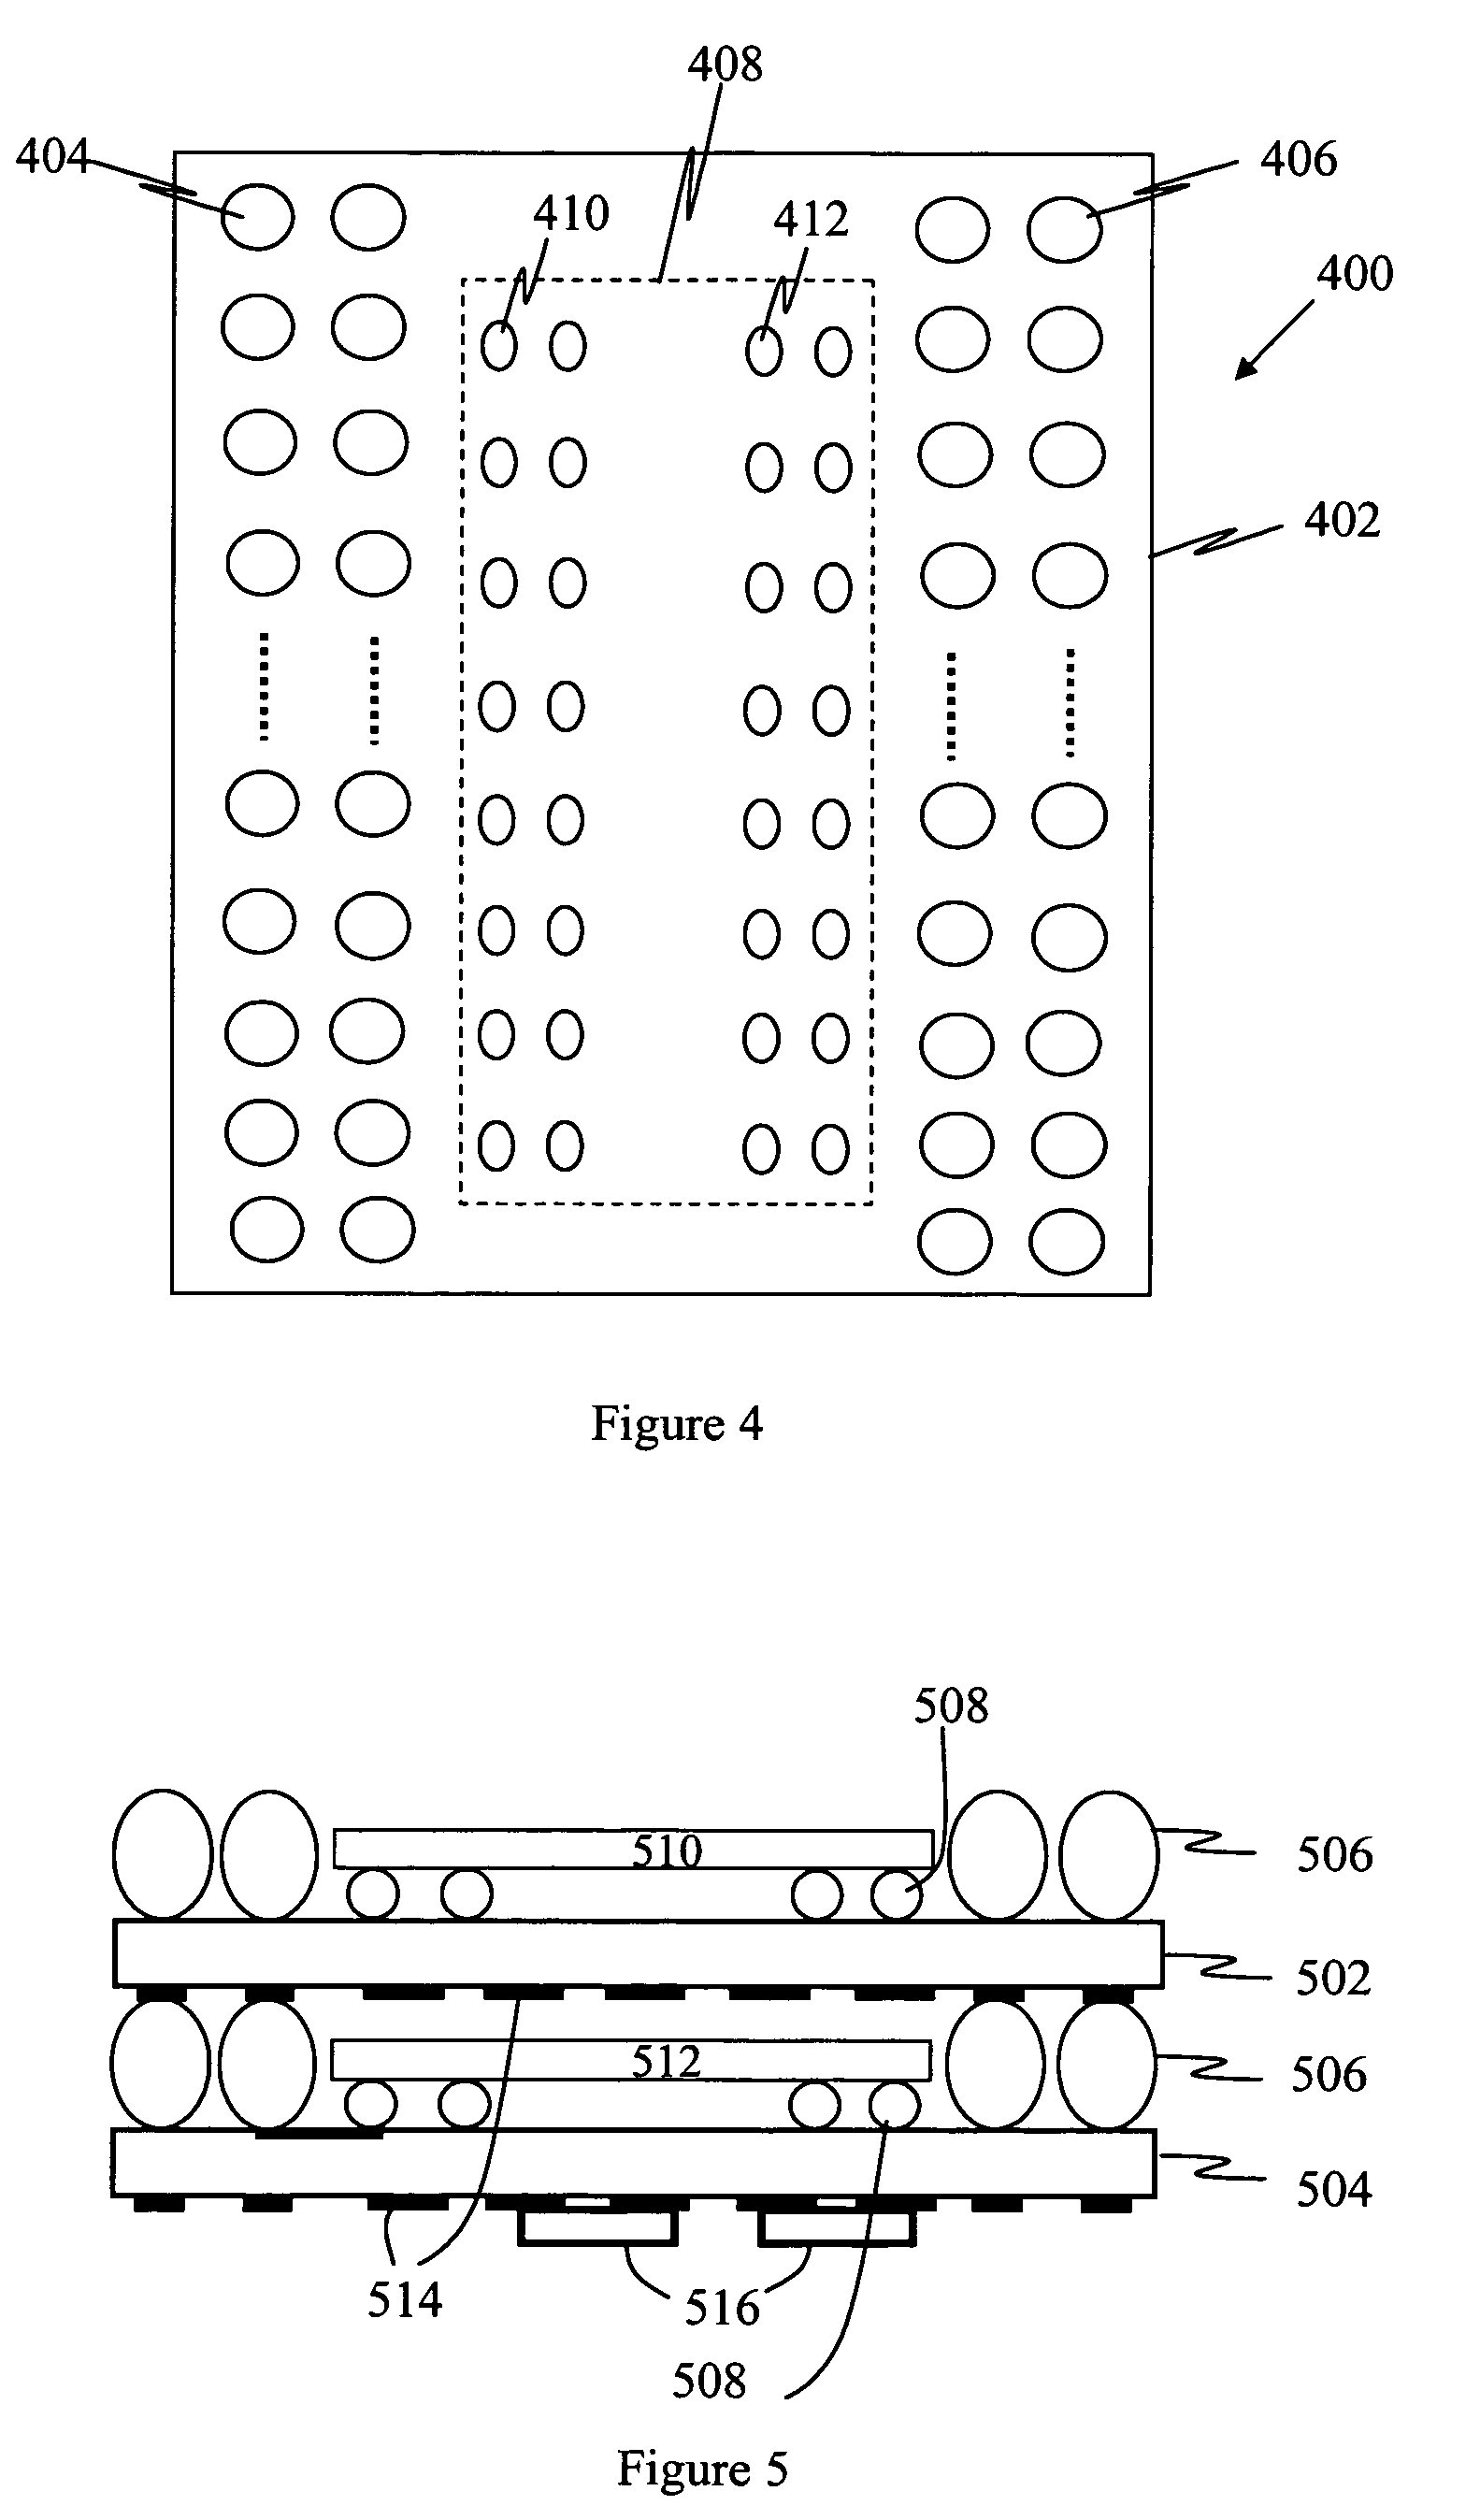 Stackable electronic assembly